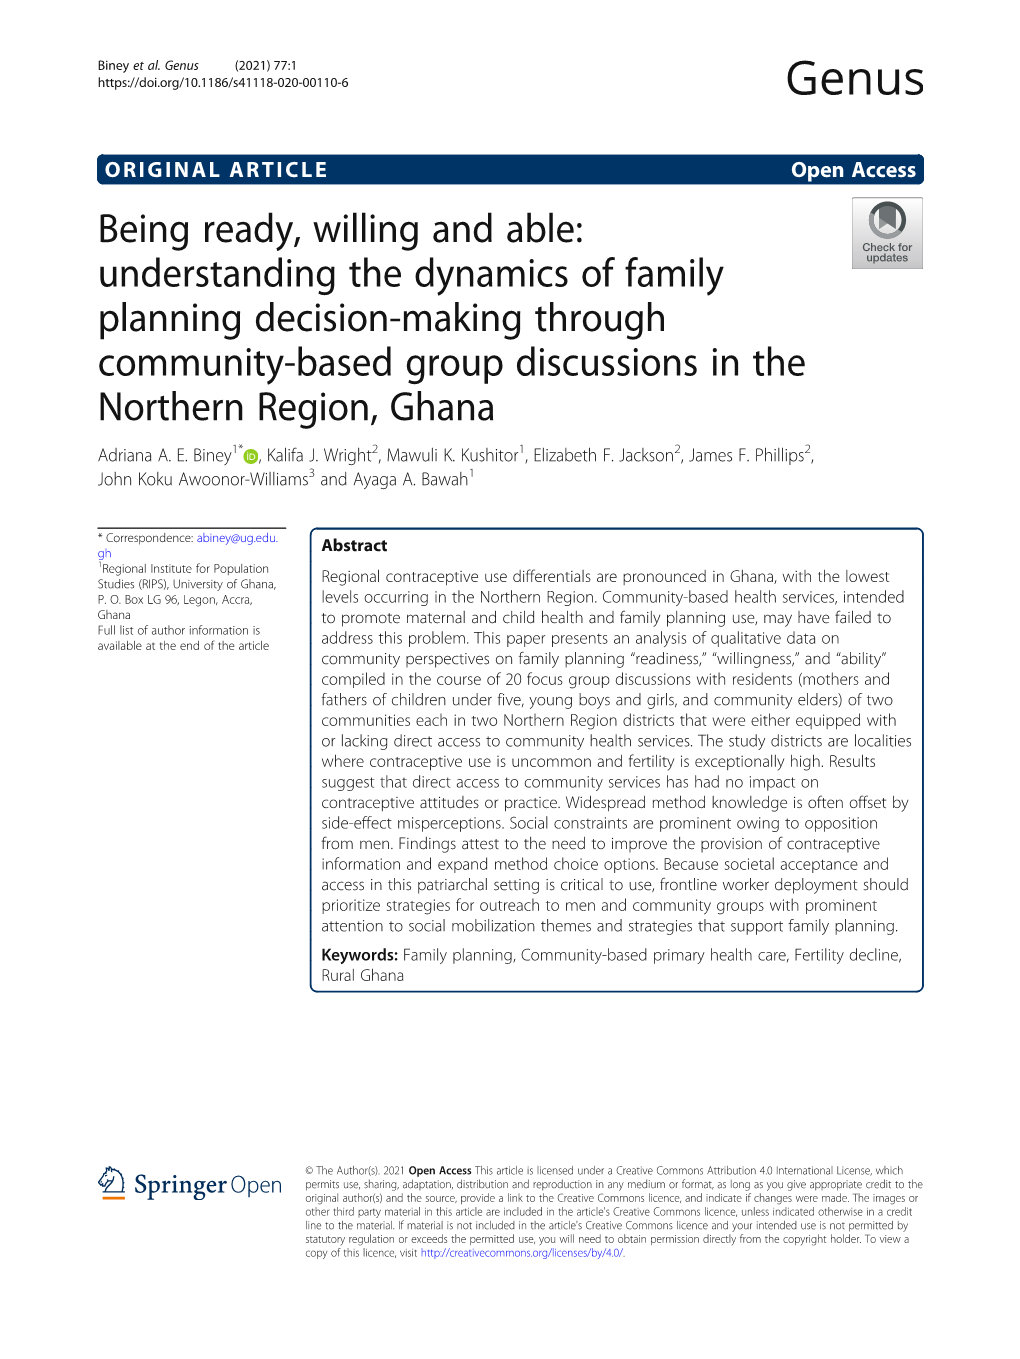 Understanding the Dynamics of Family Planning Decision-Making Through Community-Based Group Discussions in the Northern Region, Ghana Adriana A